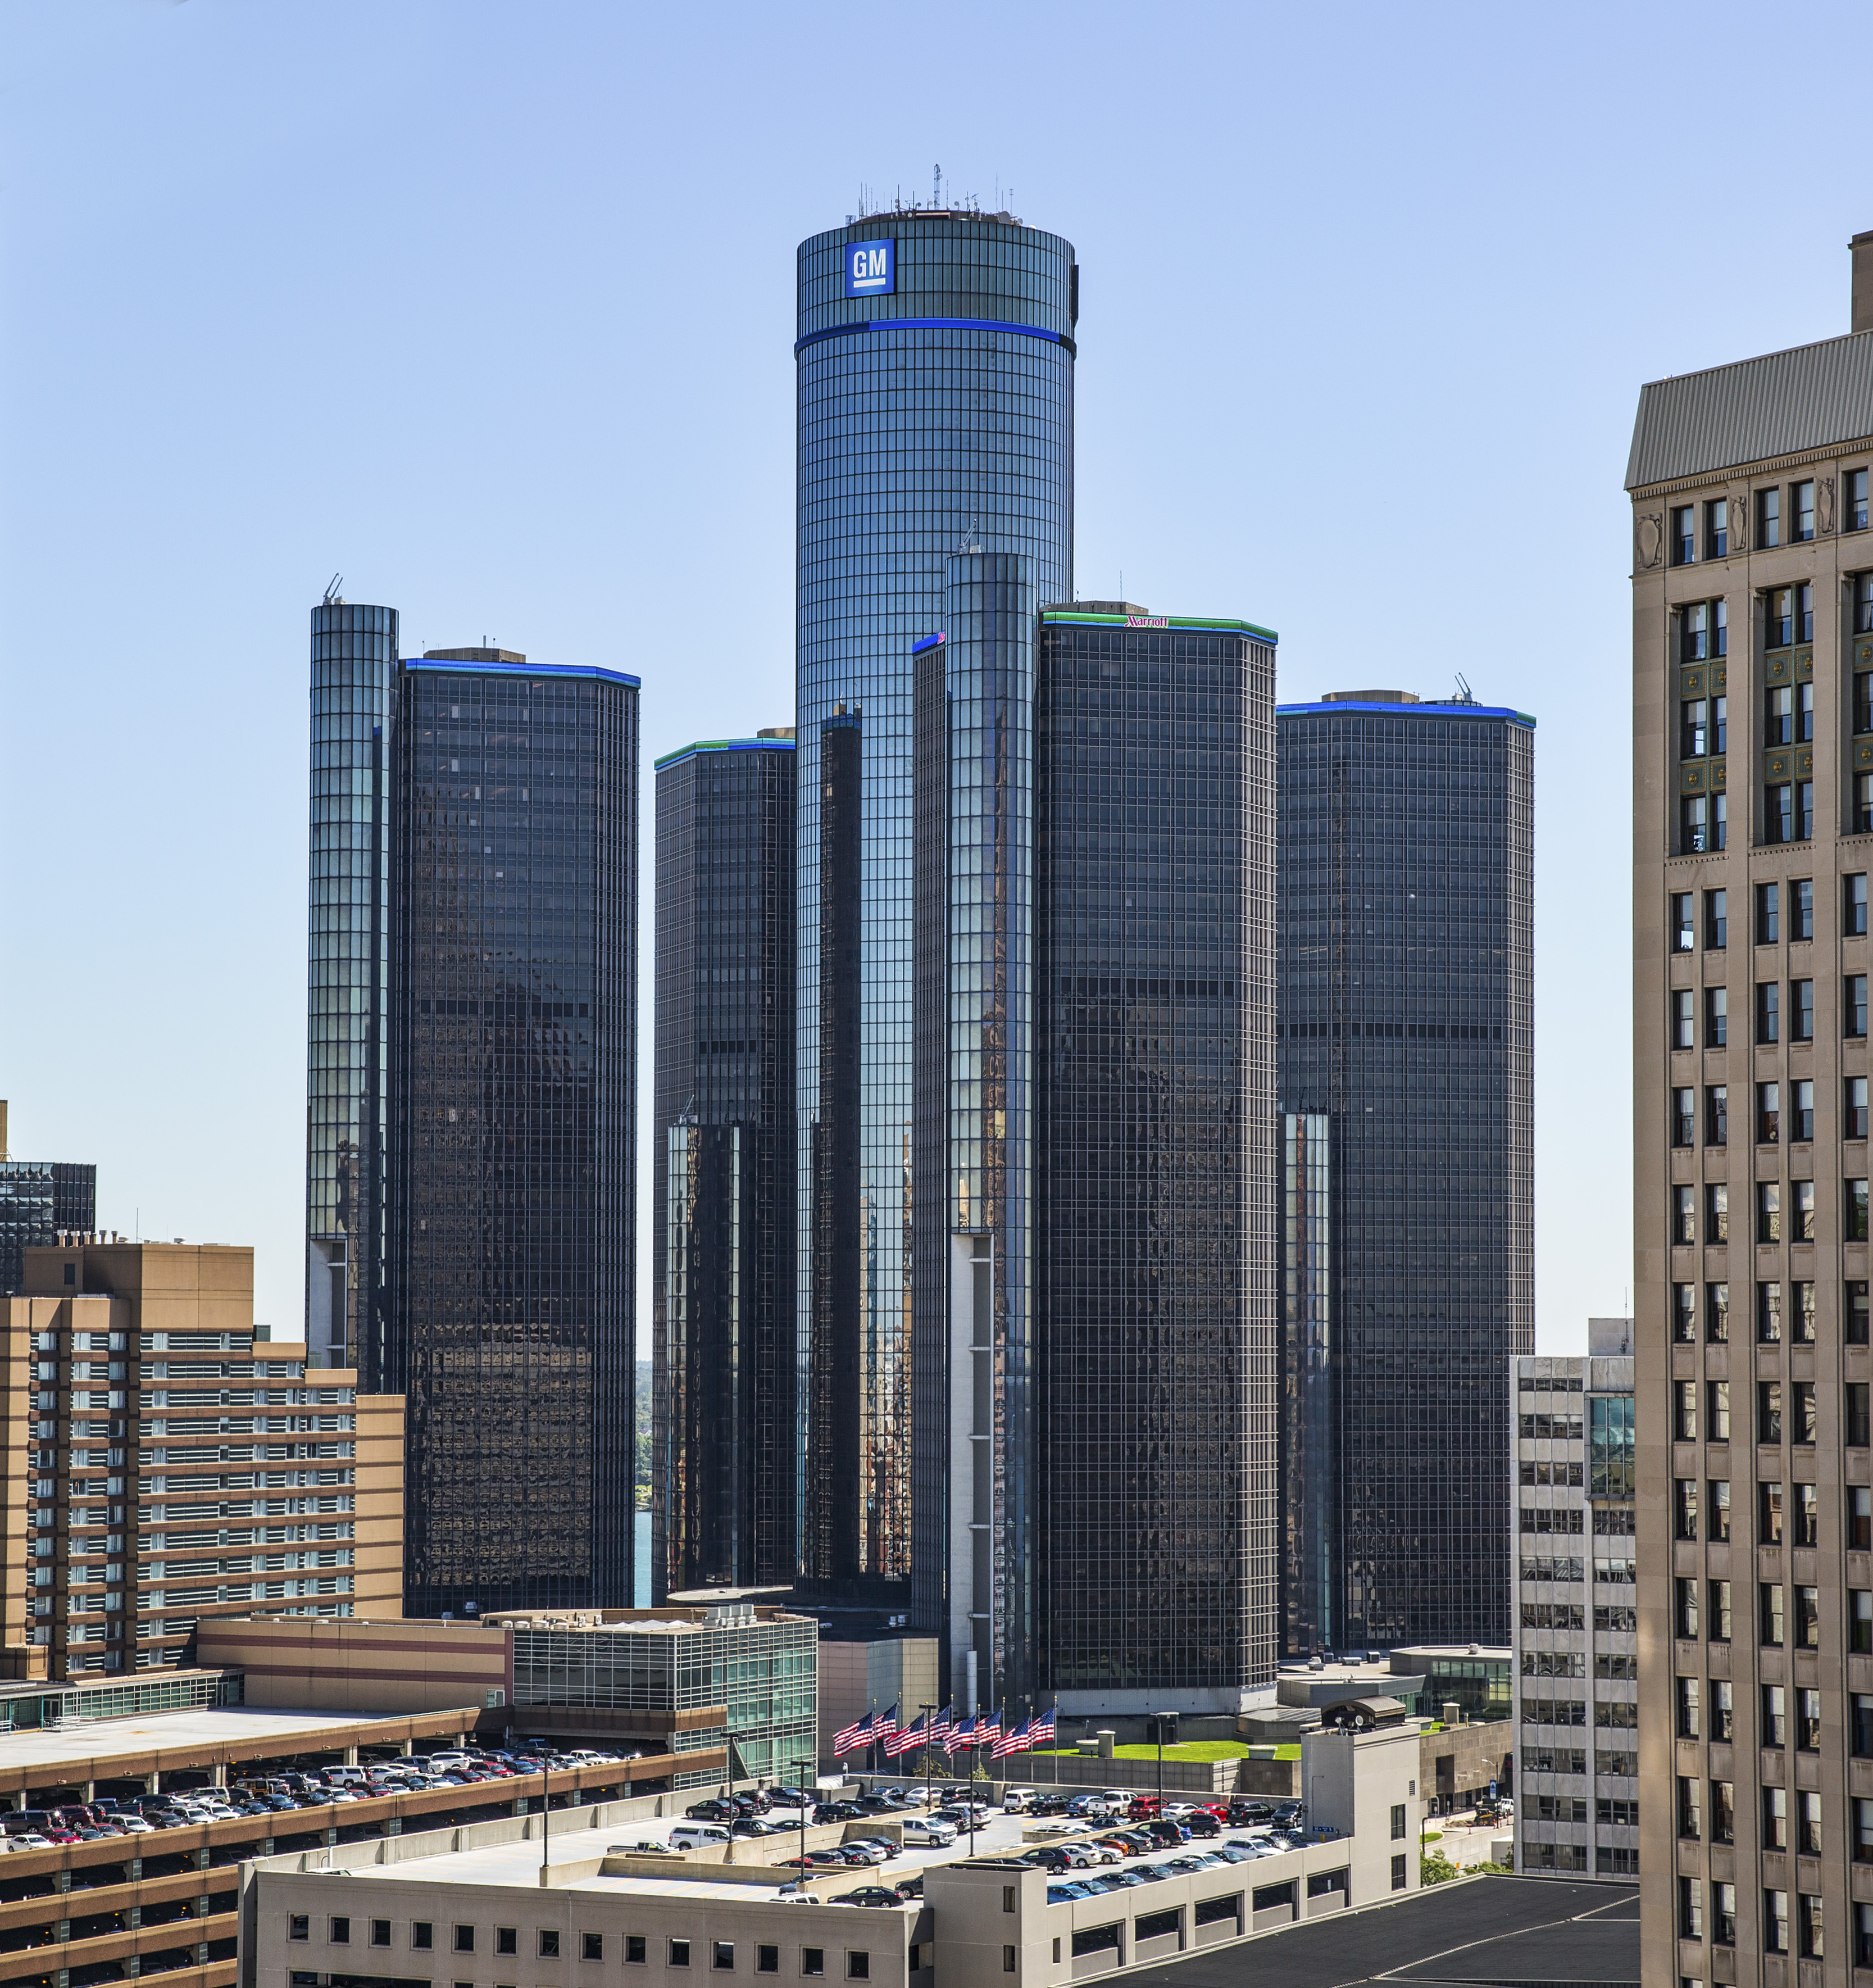 architectural photograph of the GM Bldg. in Detroit, MI